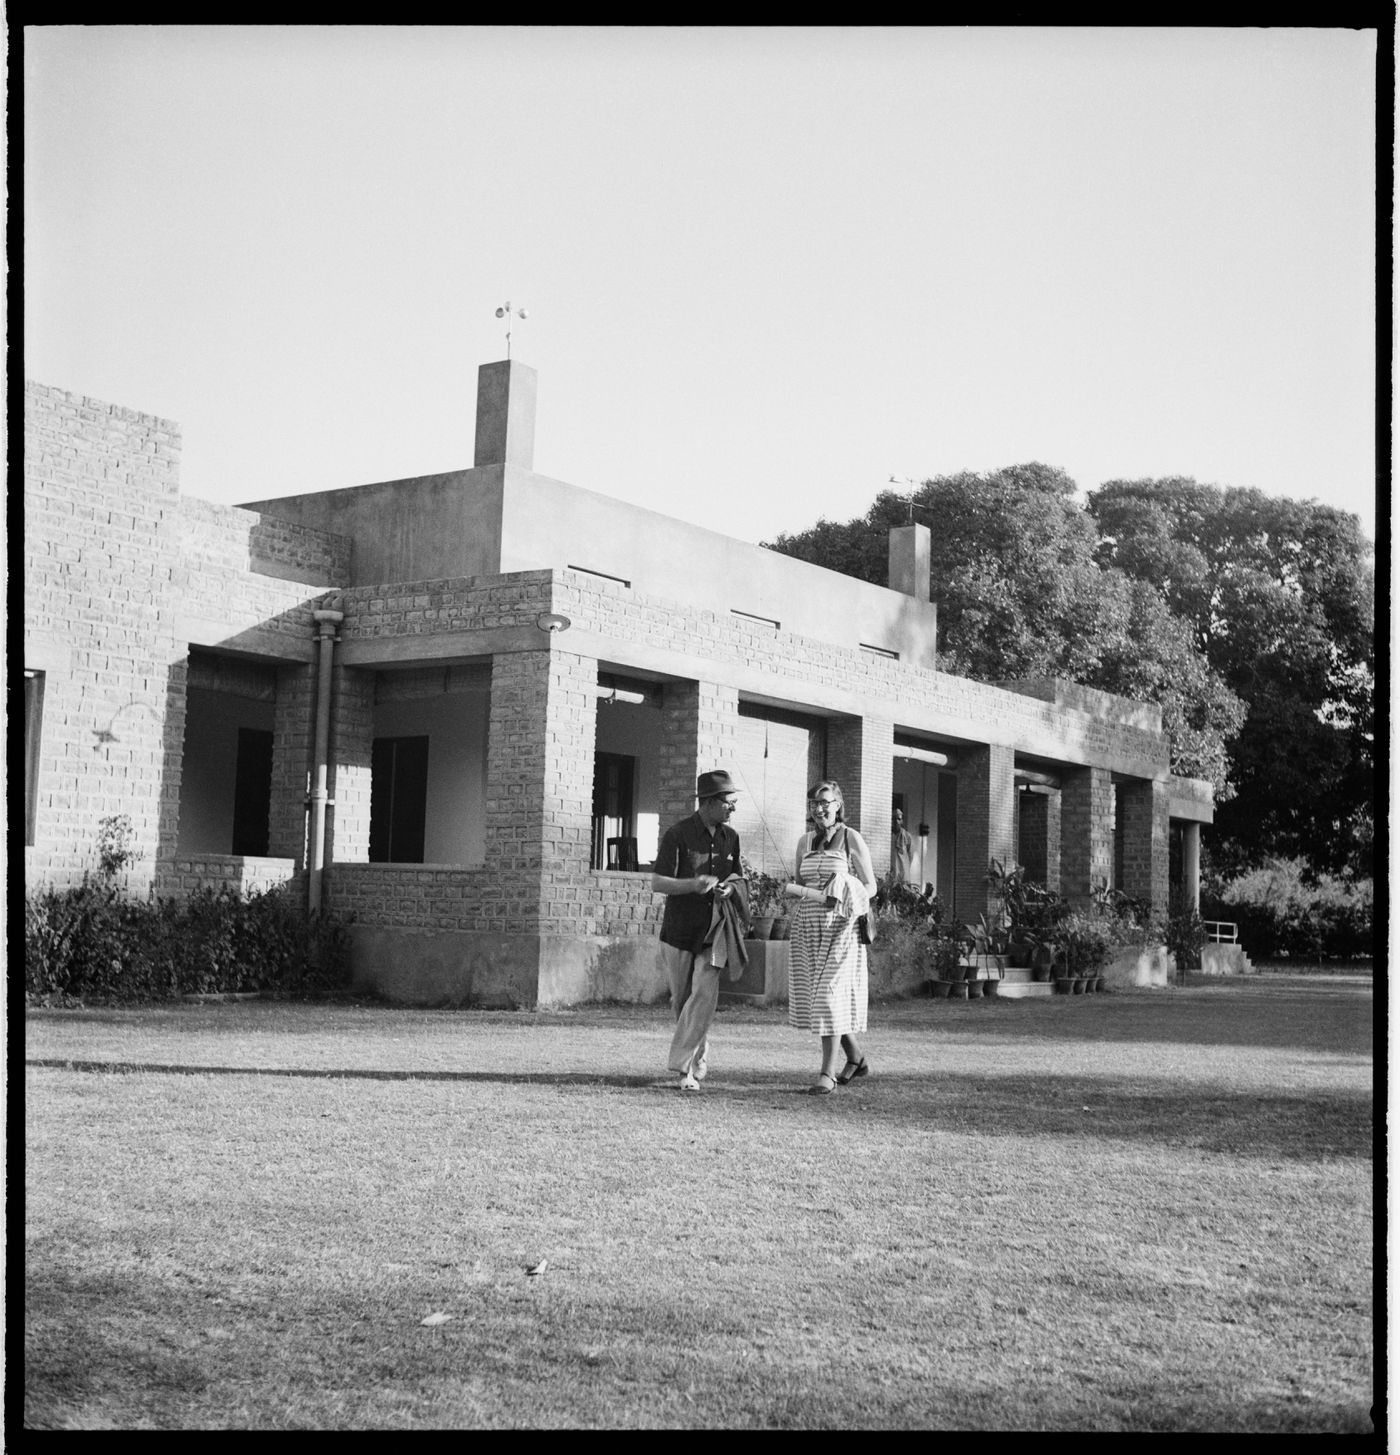 Maxwell Fry and Jane Drew in front of an unidentified house in Chandigarh, India